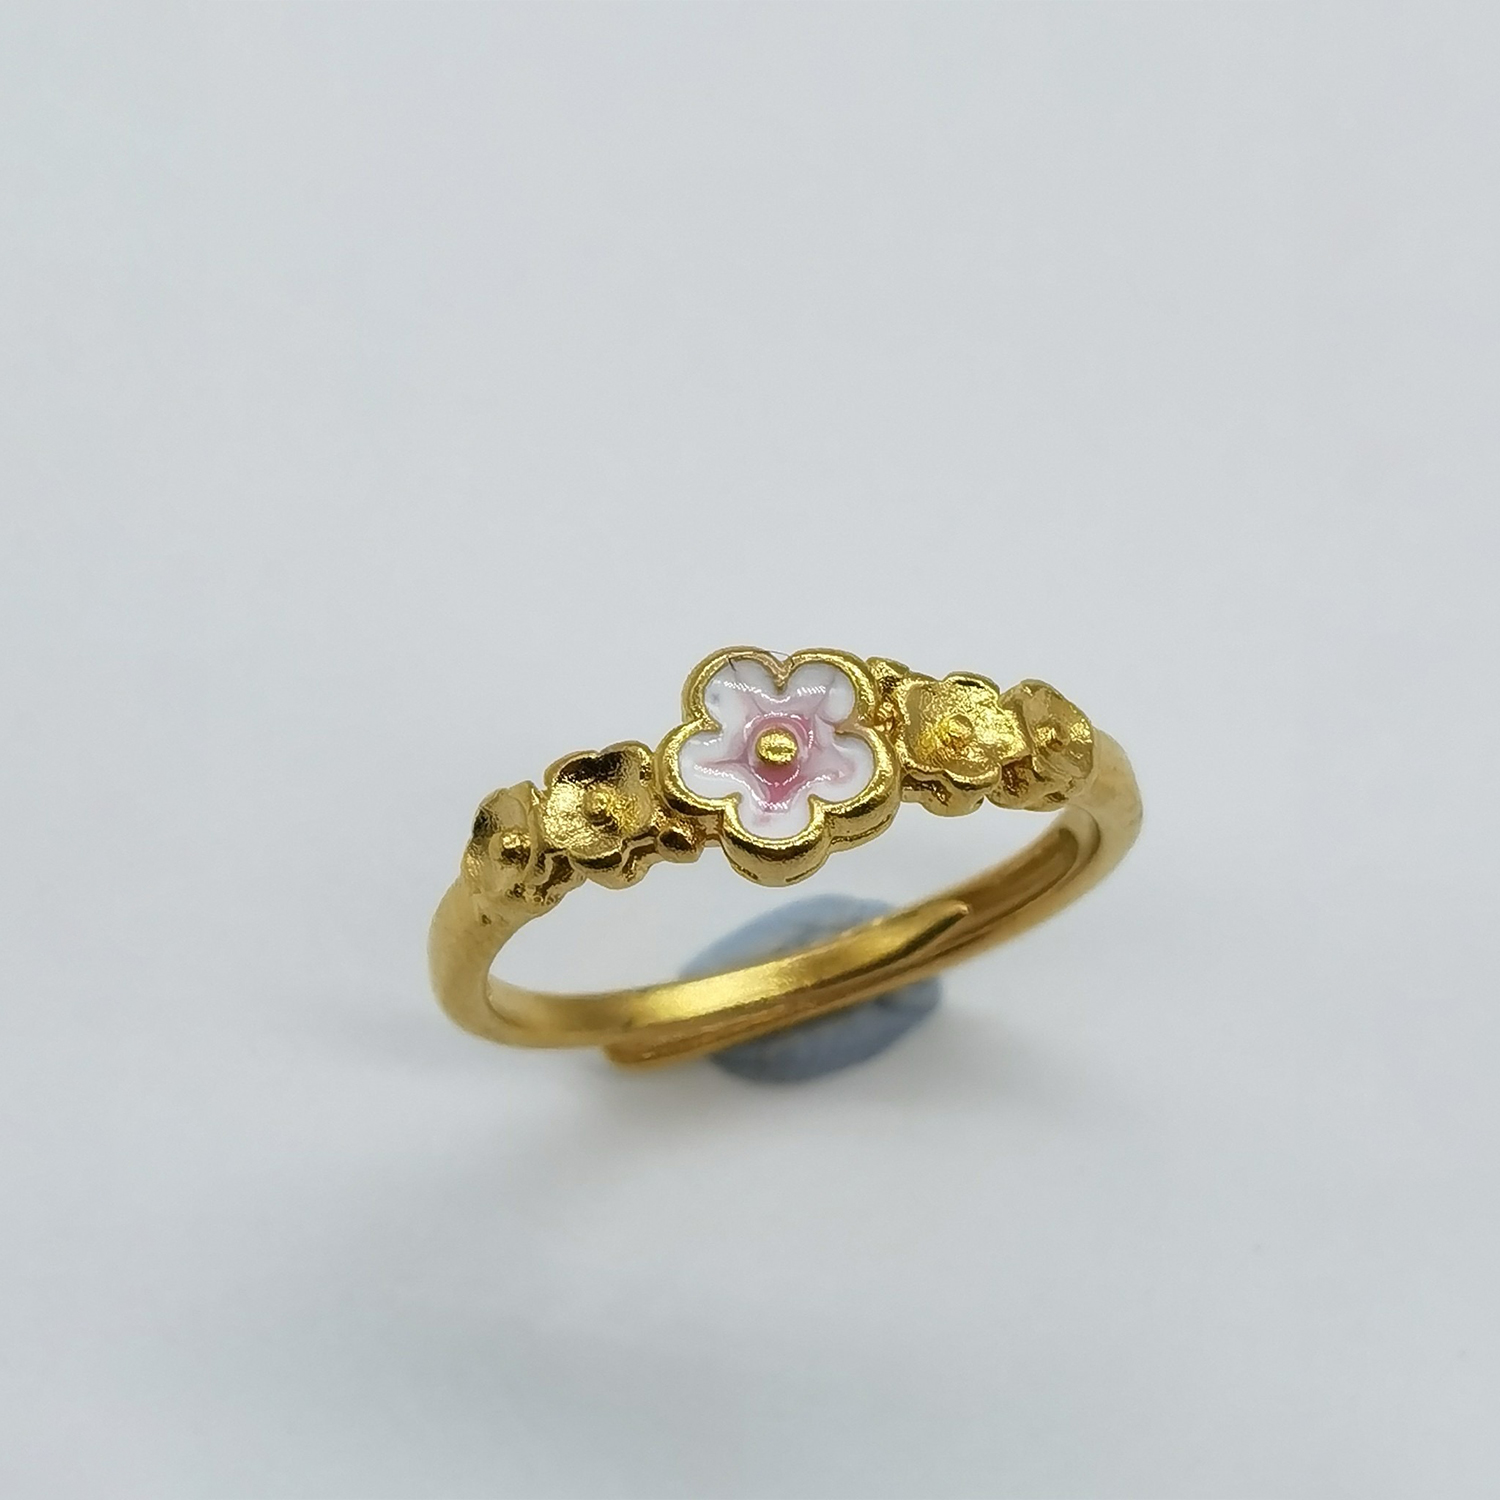 Alluvial gold vacuum electroplating 24K gold burning peach blossom ring